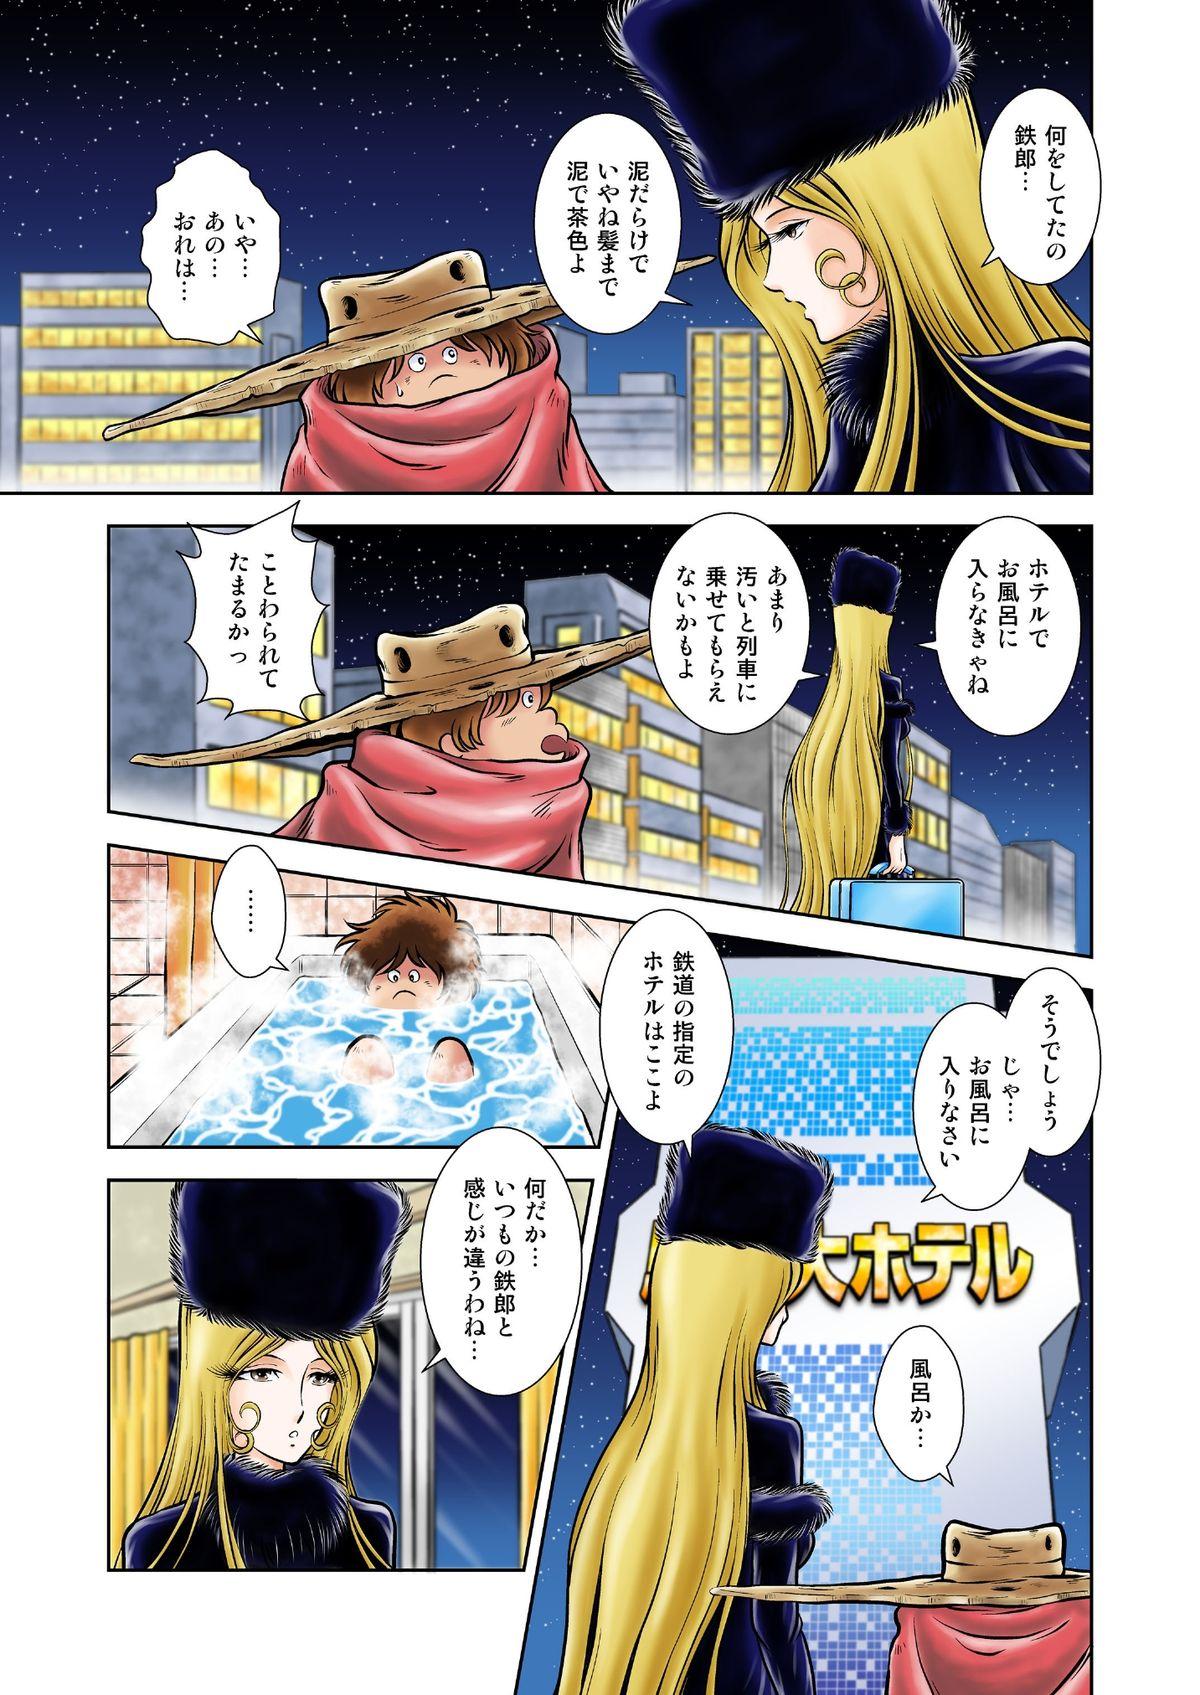 Petite Teenager Maetel Story 15 - Galaxy express 999 Booty - Page 5